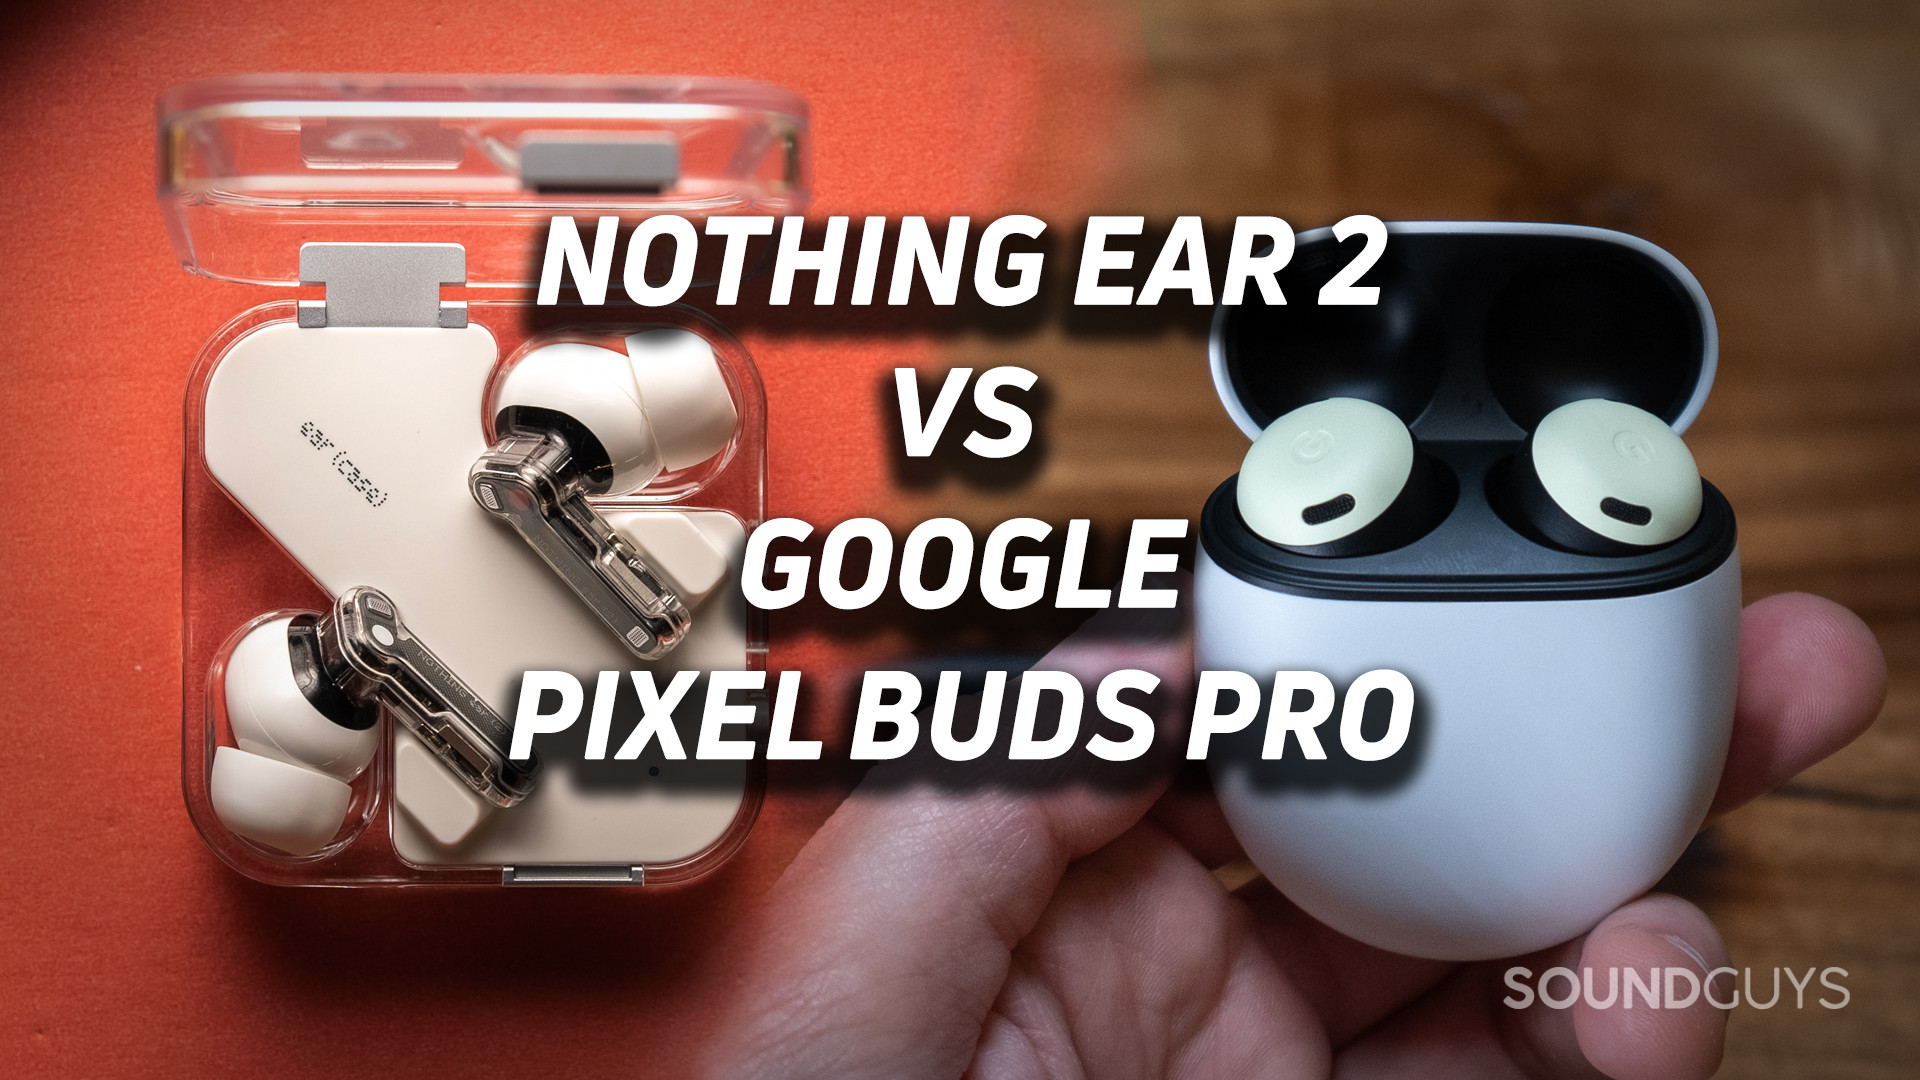 Two images spliced together show the Nothing Ear 2 on an orange surface and the Google Pixel Buds Pro head in a hand.